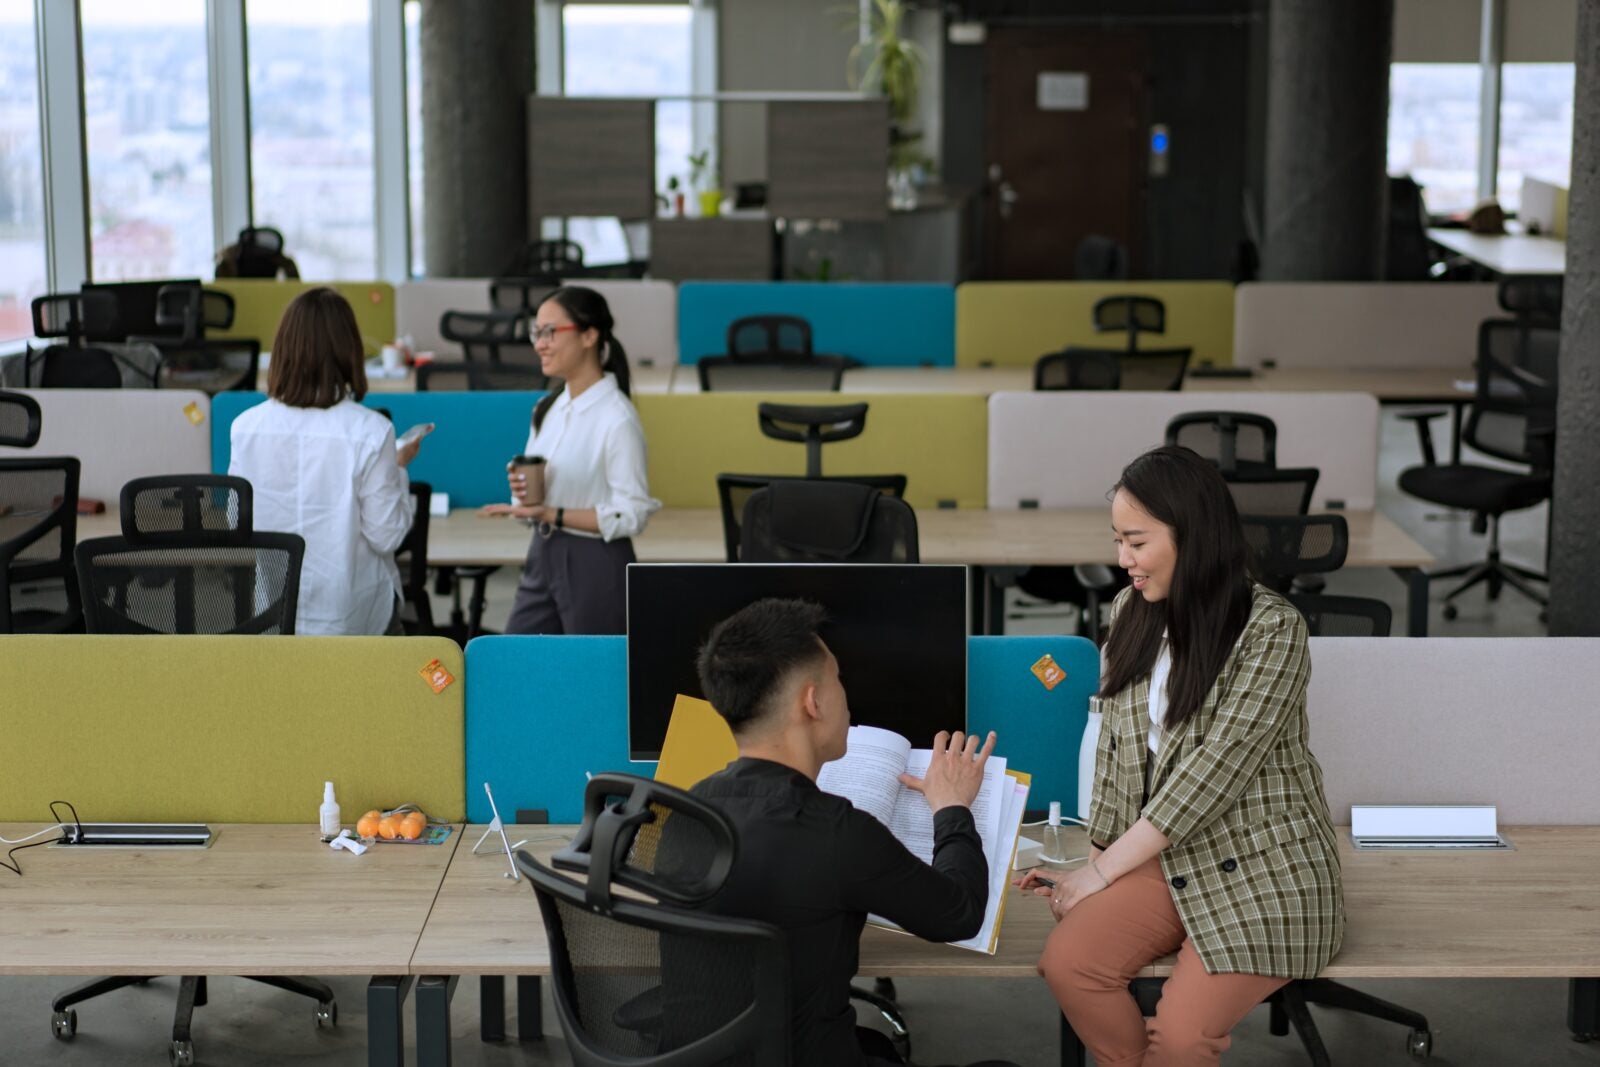 An Office With A Couple Group Of People Who Are Chatting And Generally Chilling. A Woman In Office Attire Is Sitting On A Desk And Talking To Her Male Coworker.